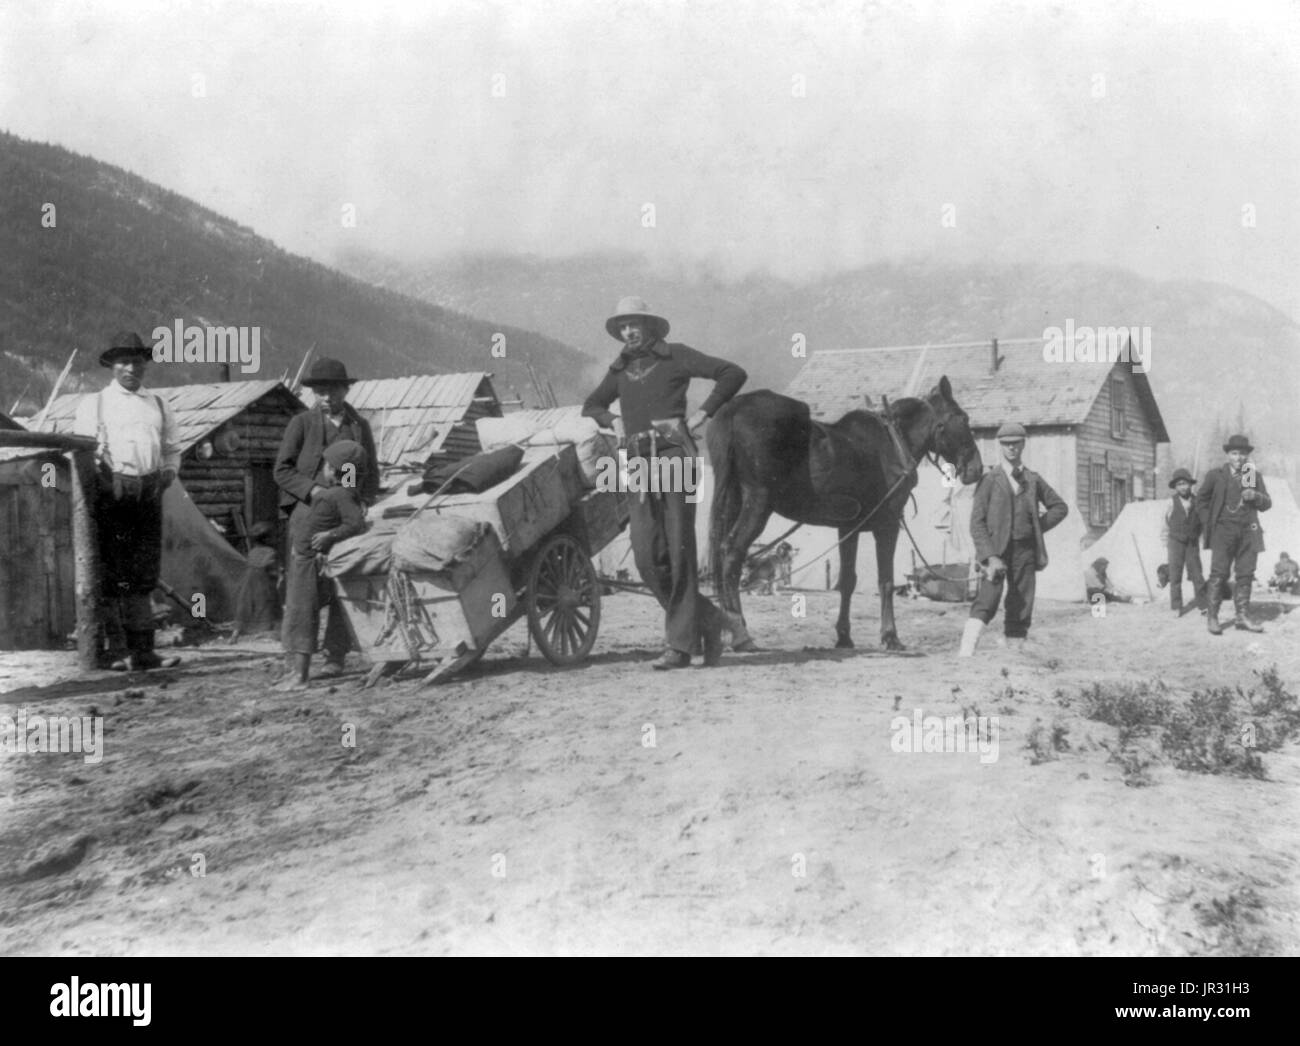 Klondike wagon loaded with provisions. The Klondike Gold Rush was a migration by an estimated 100,000 prospectors to the Klondike region of the Yukon between 1896-99. Gold was discovered by local miners on August 16, 1896 and, when news reached Seattle and San Francisco, it triggered a stampede of would-be prospectors. To reach the gold fields most took the route through the ports of Dyea and Skagway in Alaska. Here, the Klondikers could follow either the Chilkoot or the White Pass trails to the Yukon River and sail down to the Klondike. Each of them was required to bring a year's supply of fo Stock Photo